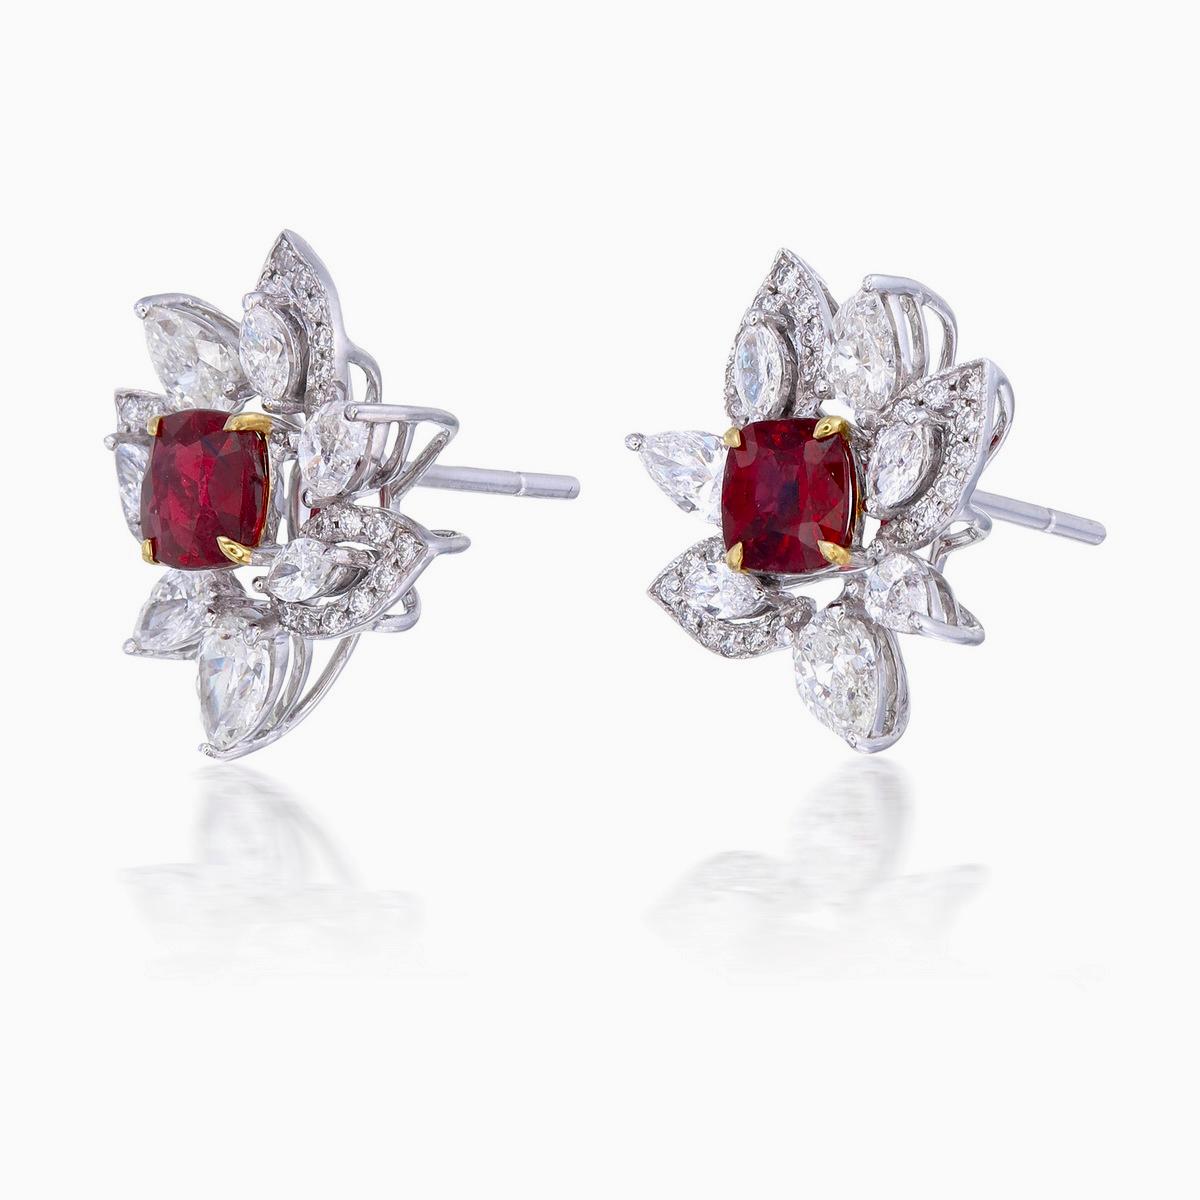 Presenting an exquisite creation from Rewa Jewelry, these ruby and diamond earrings are a testament to the brand's commitment to timeless elegance and superior craftsmanship, drawing inspiration from classic themes.

At the heart of these earrings